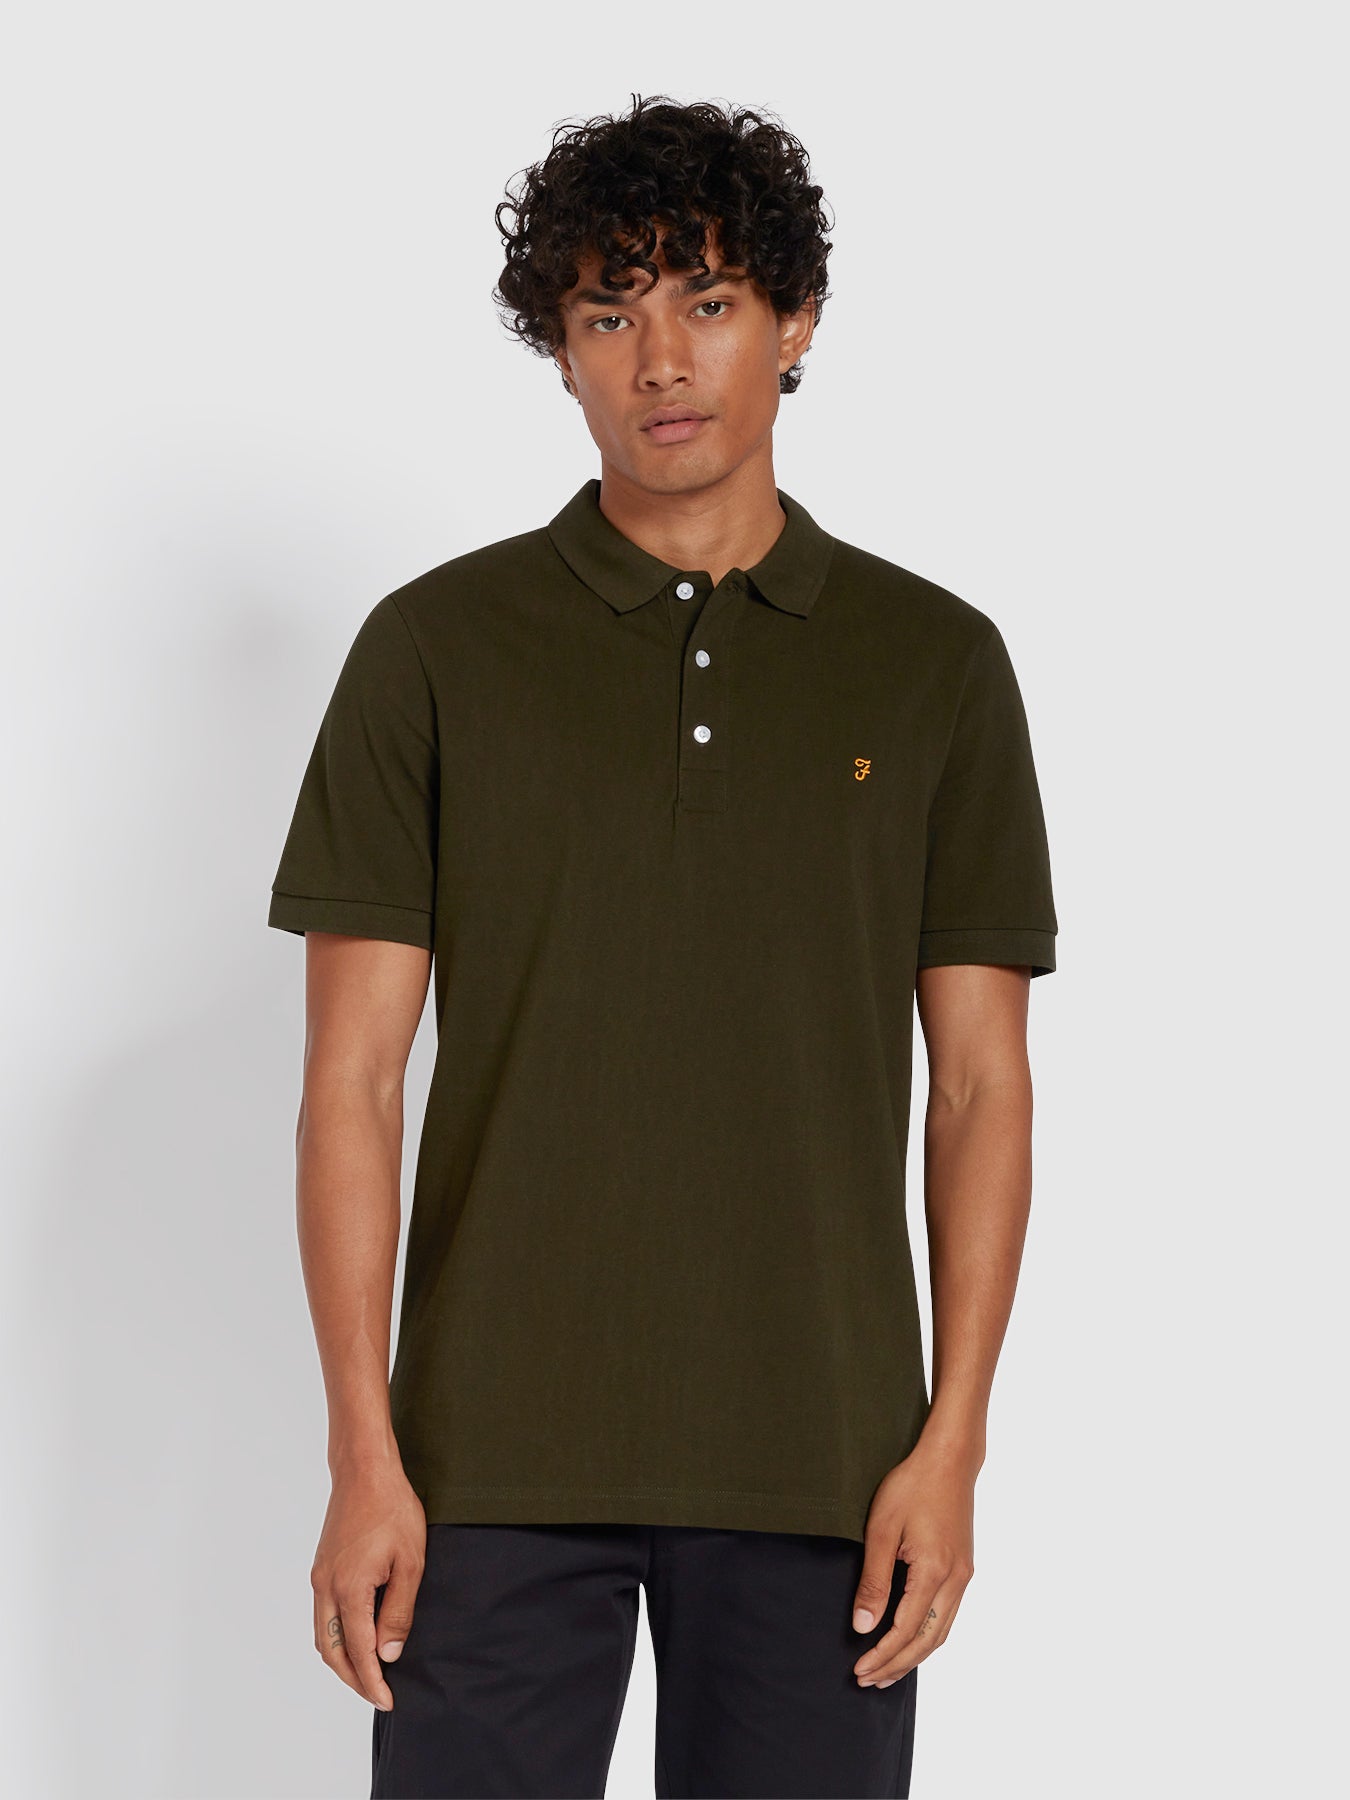 View Blanes Slim Fit Organic Cotton Polo Shirt In Evergreen information